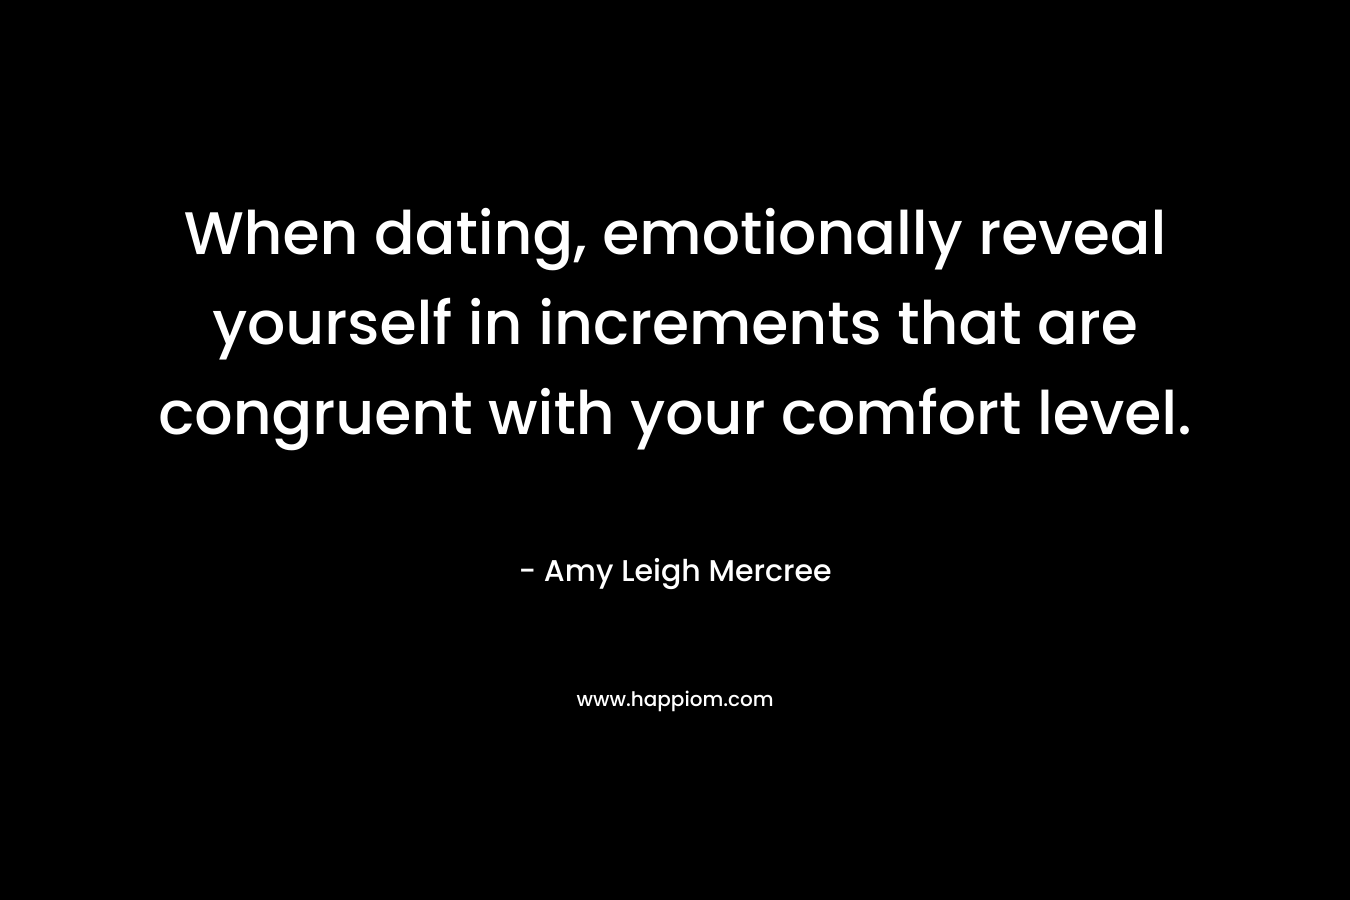 When dating, emotionally reveal yourself in increments that are congruent with your comfort level. – Amy Leigh Mercree